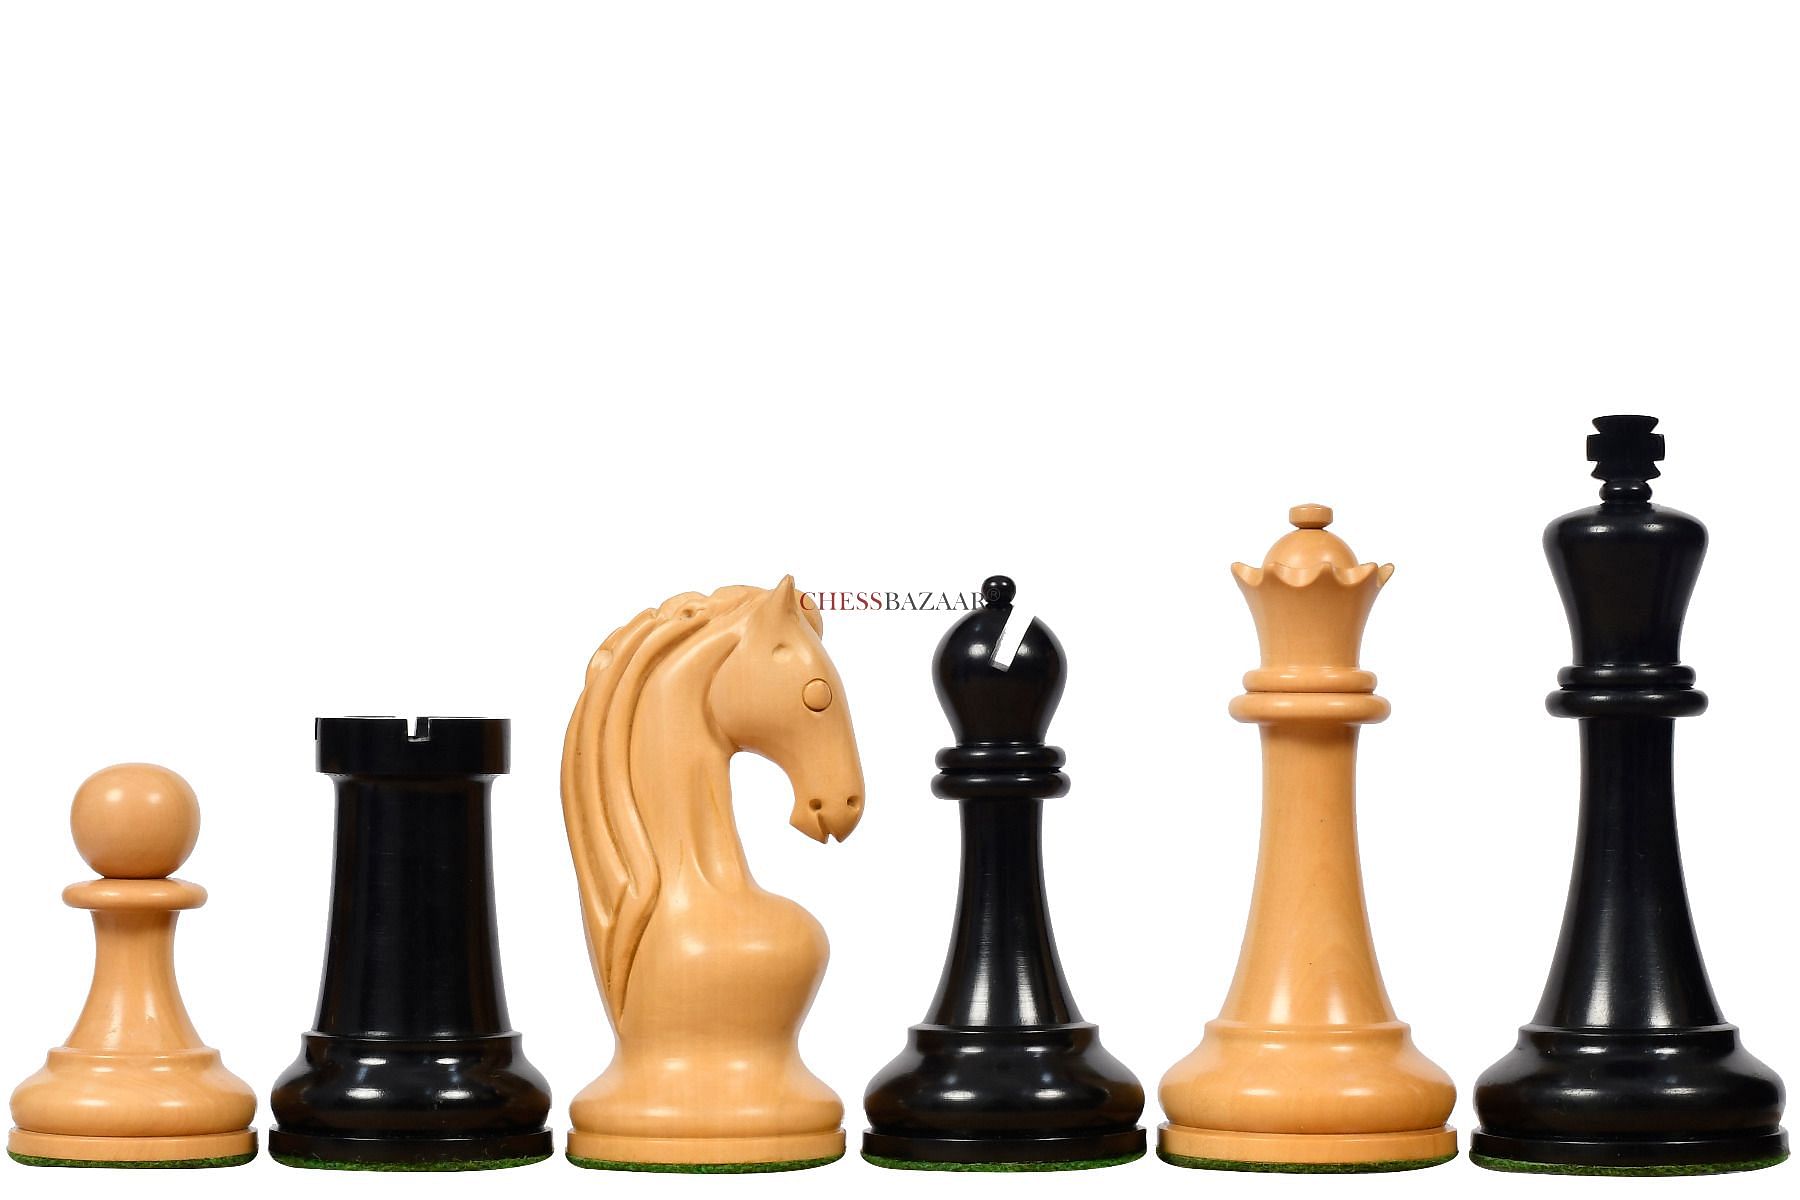 The Bobby Fischer Ultimate Chess Pieces – Chess House